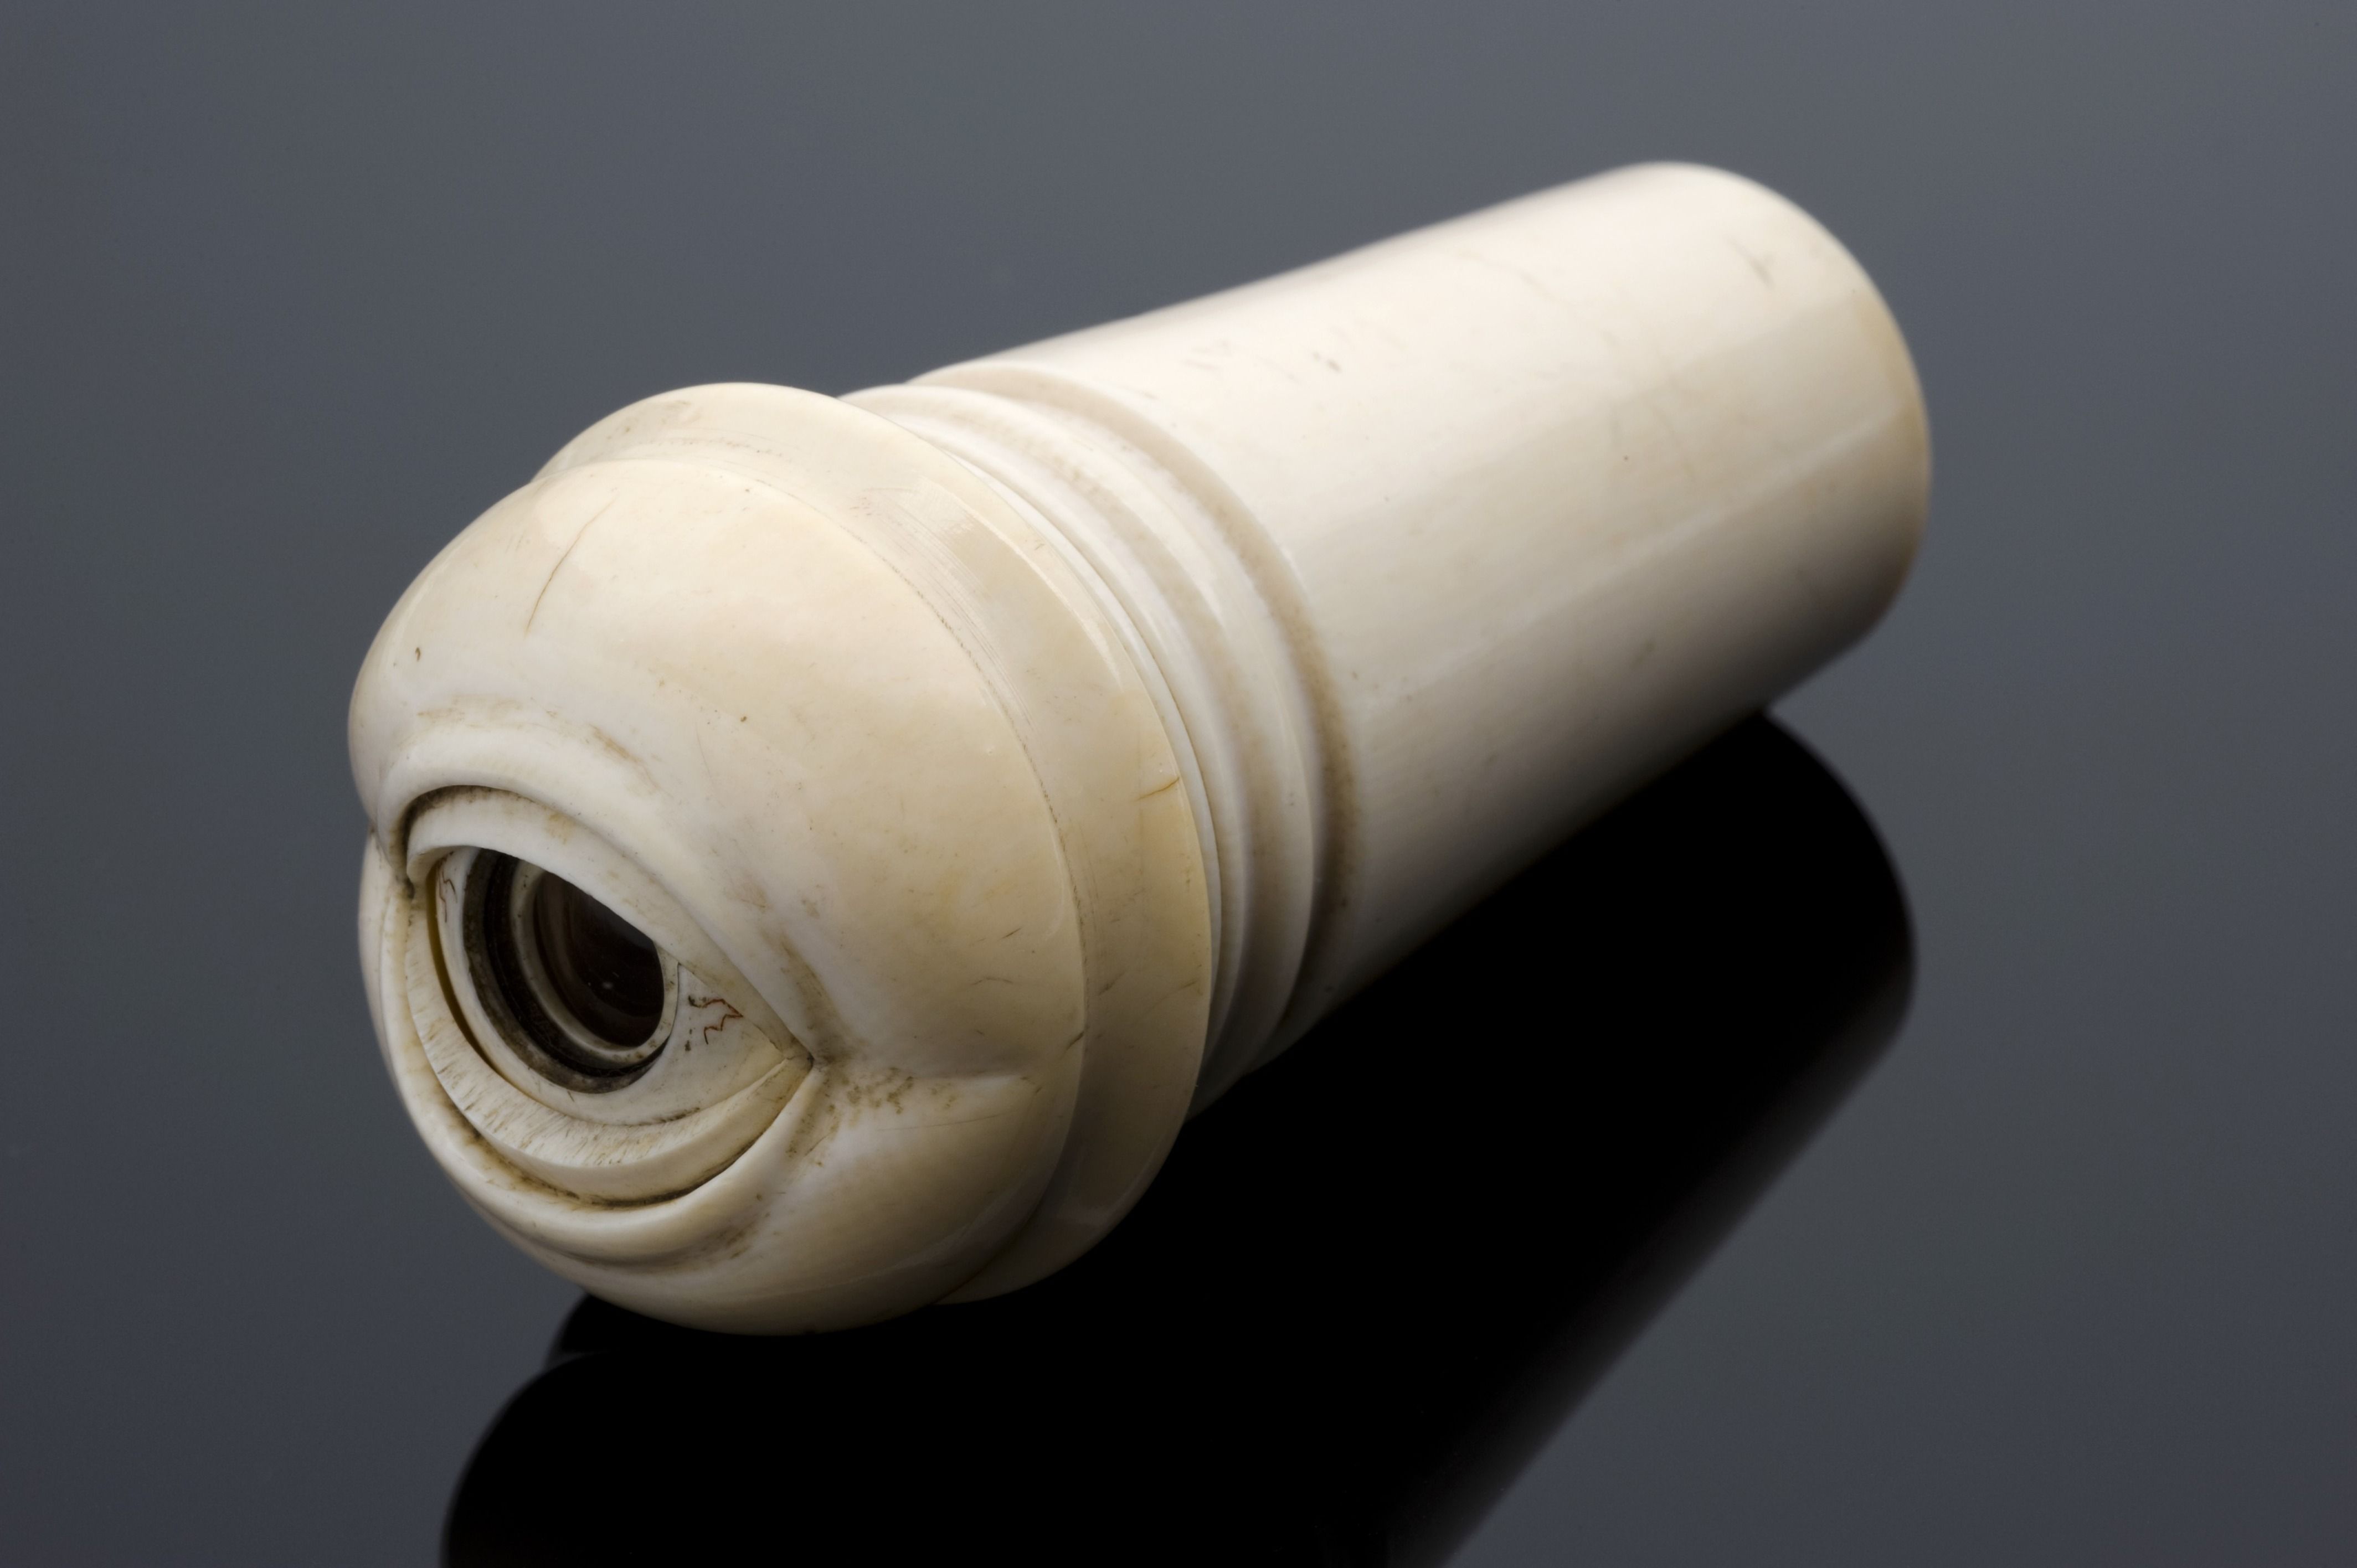 First Fleshlight prototype, carved ivory and horn, European, c. 1800-1900.